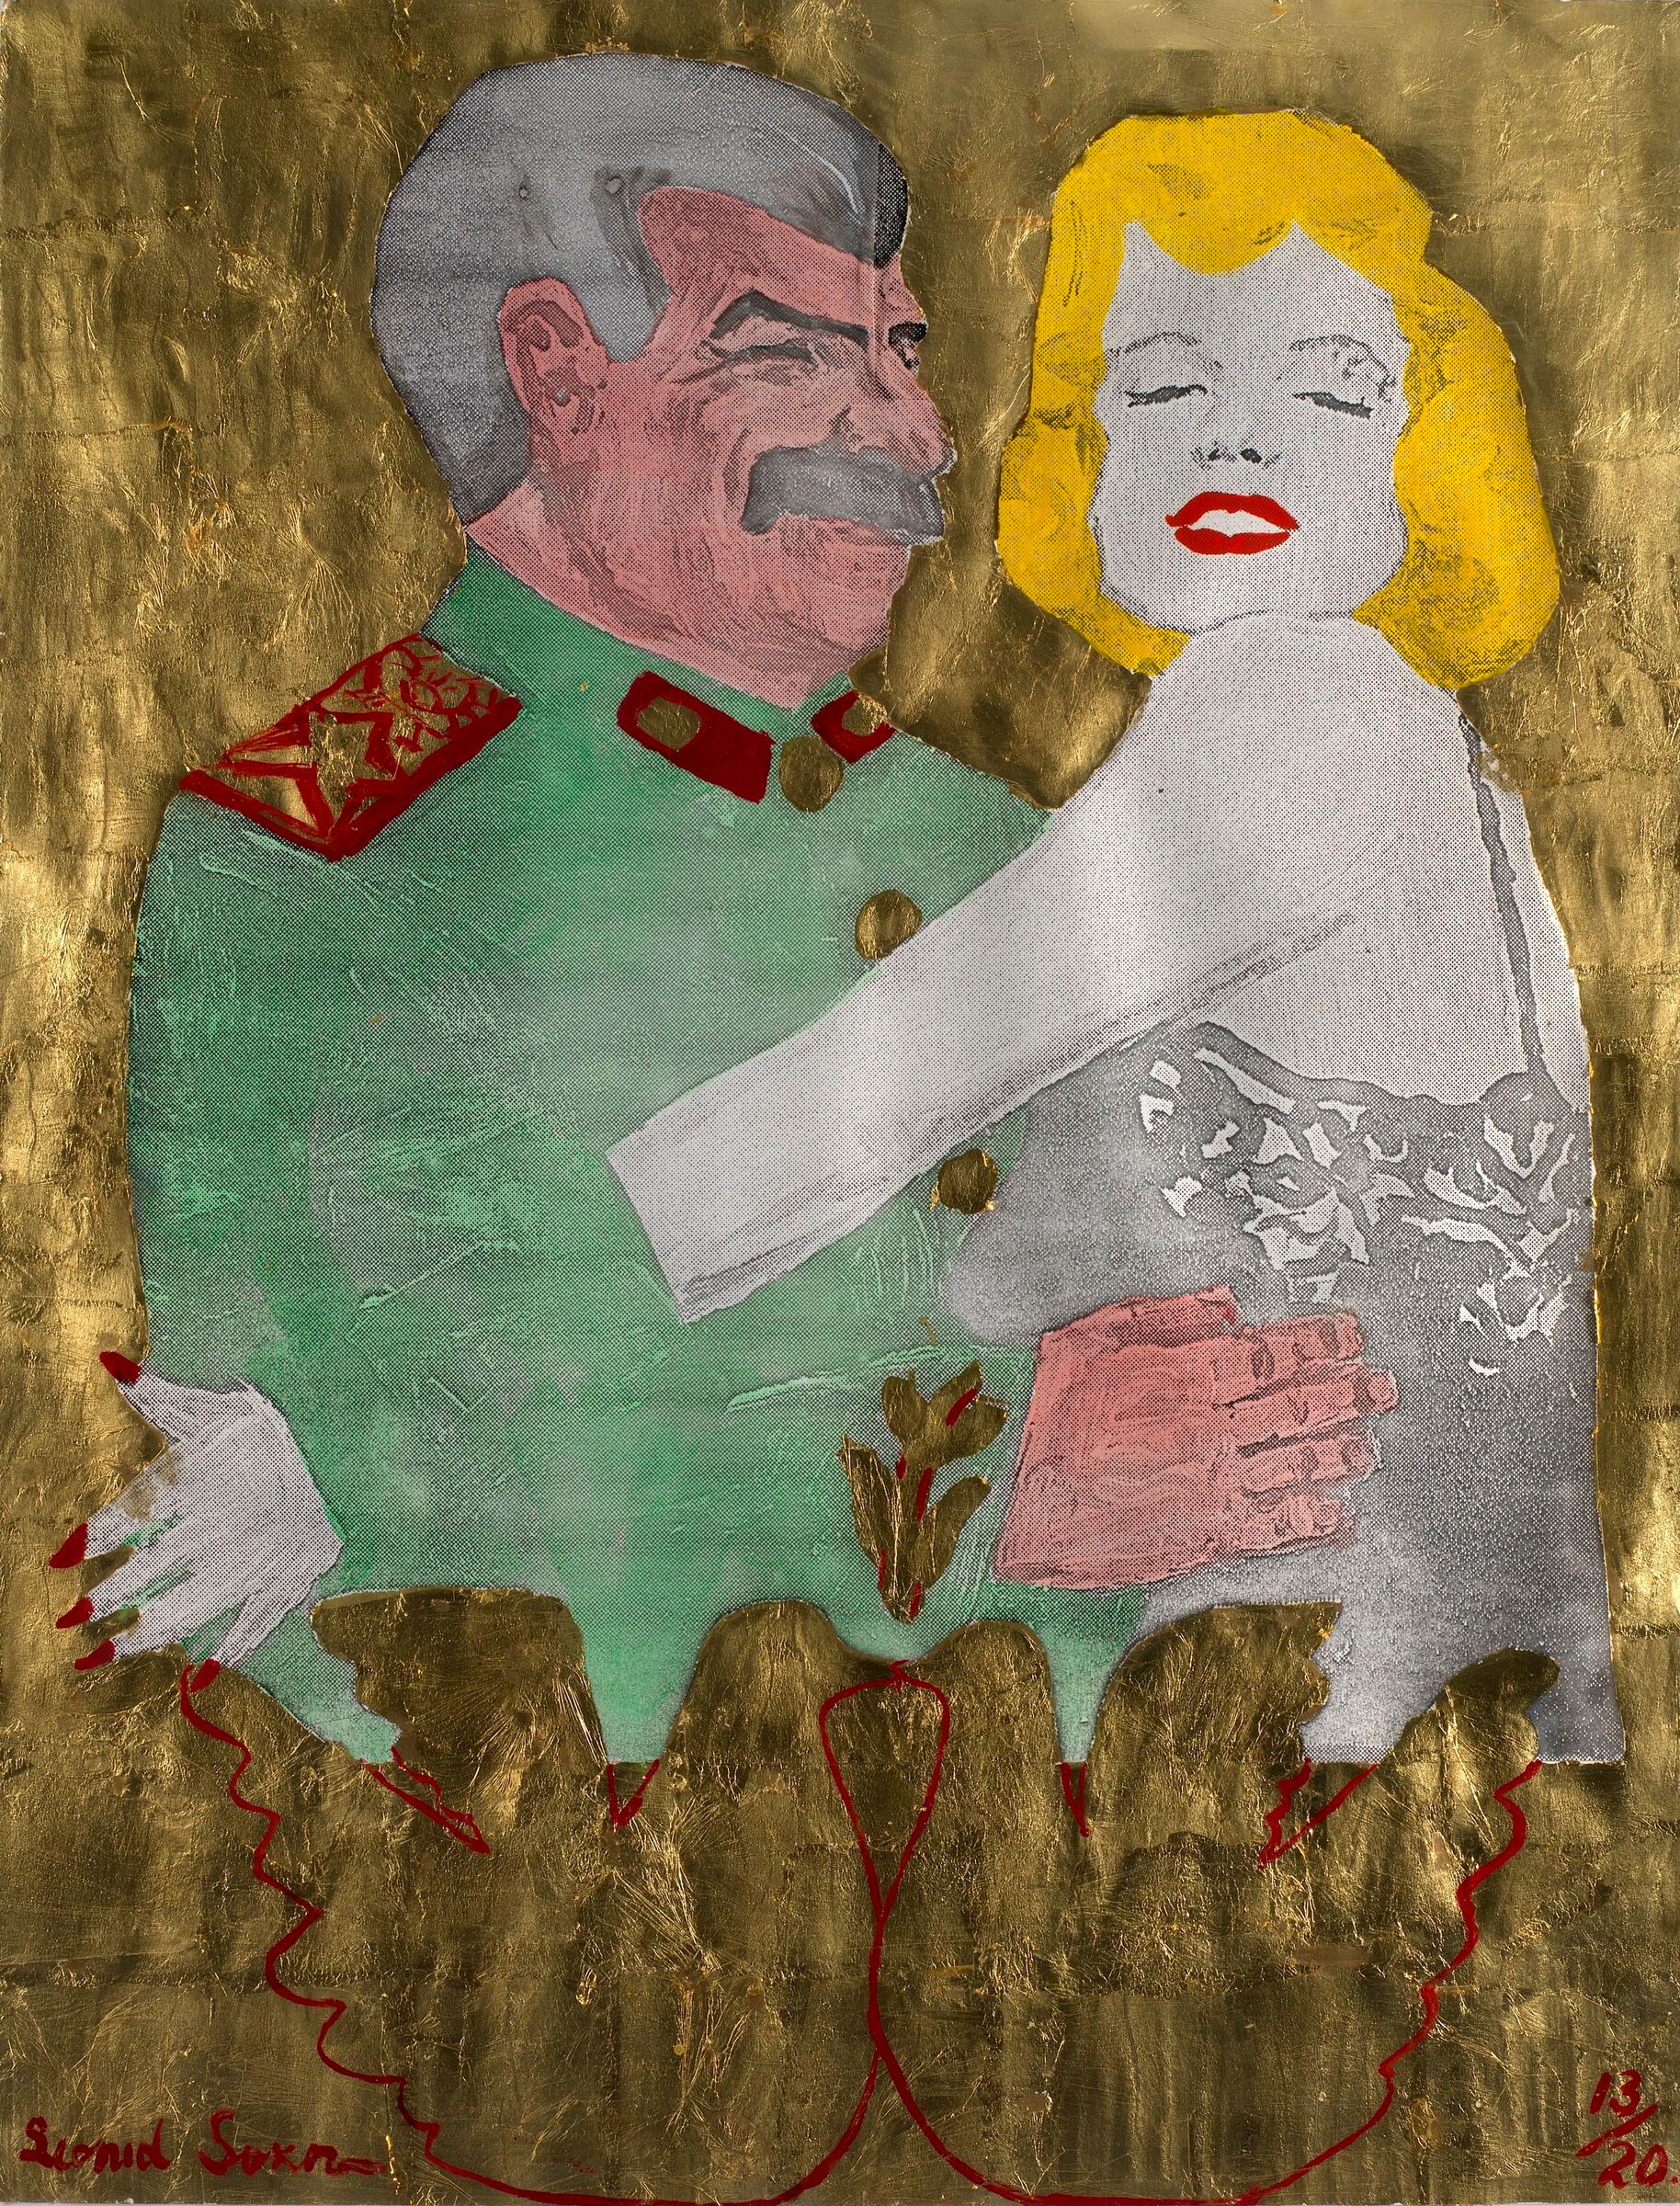 Stalin and Marilyn